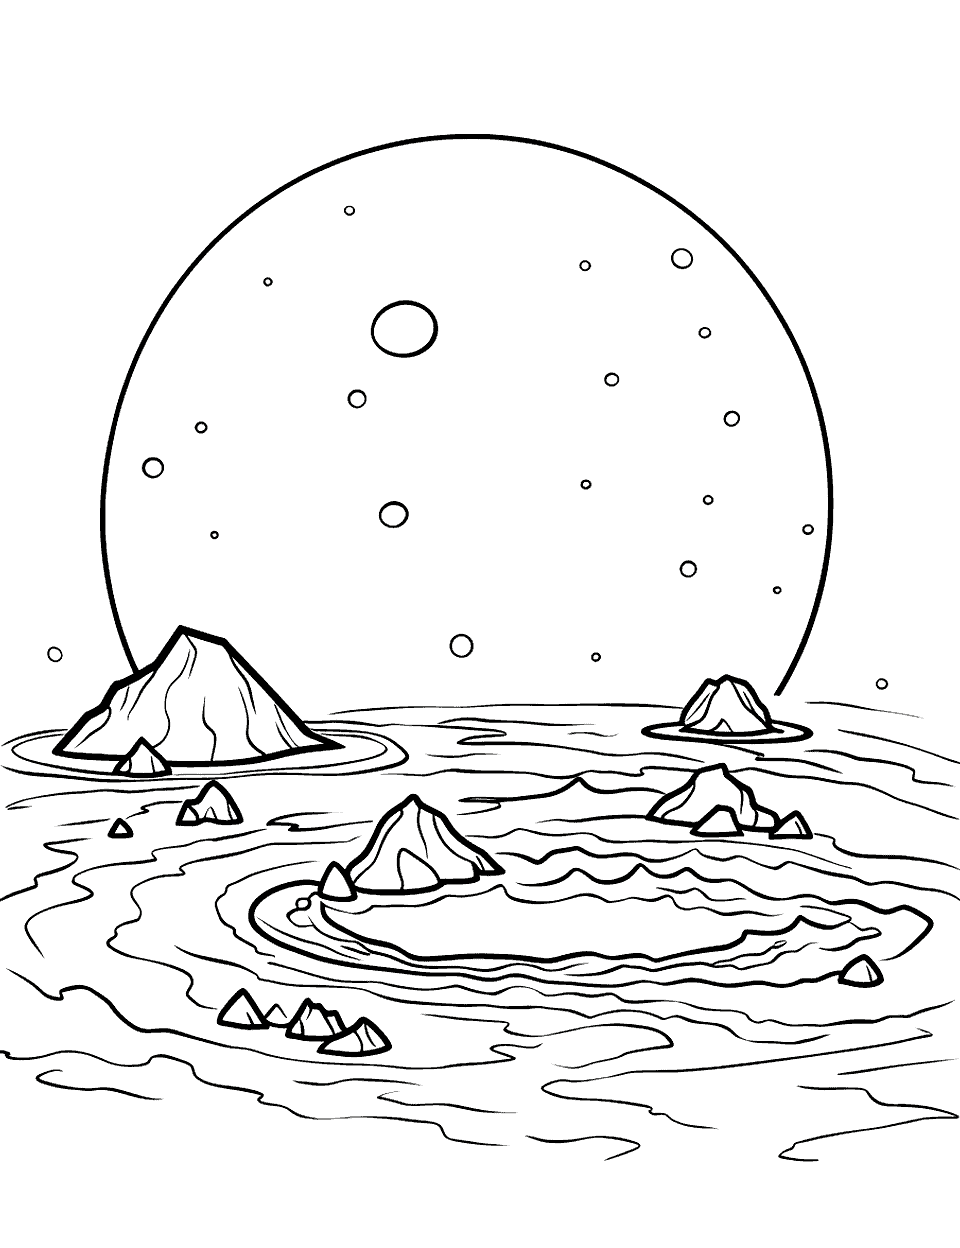 Jupiter's Io Volcano Solar System Coloring Page - Io, one of Jupiter’s moons, with a volcano.